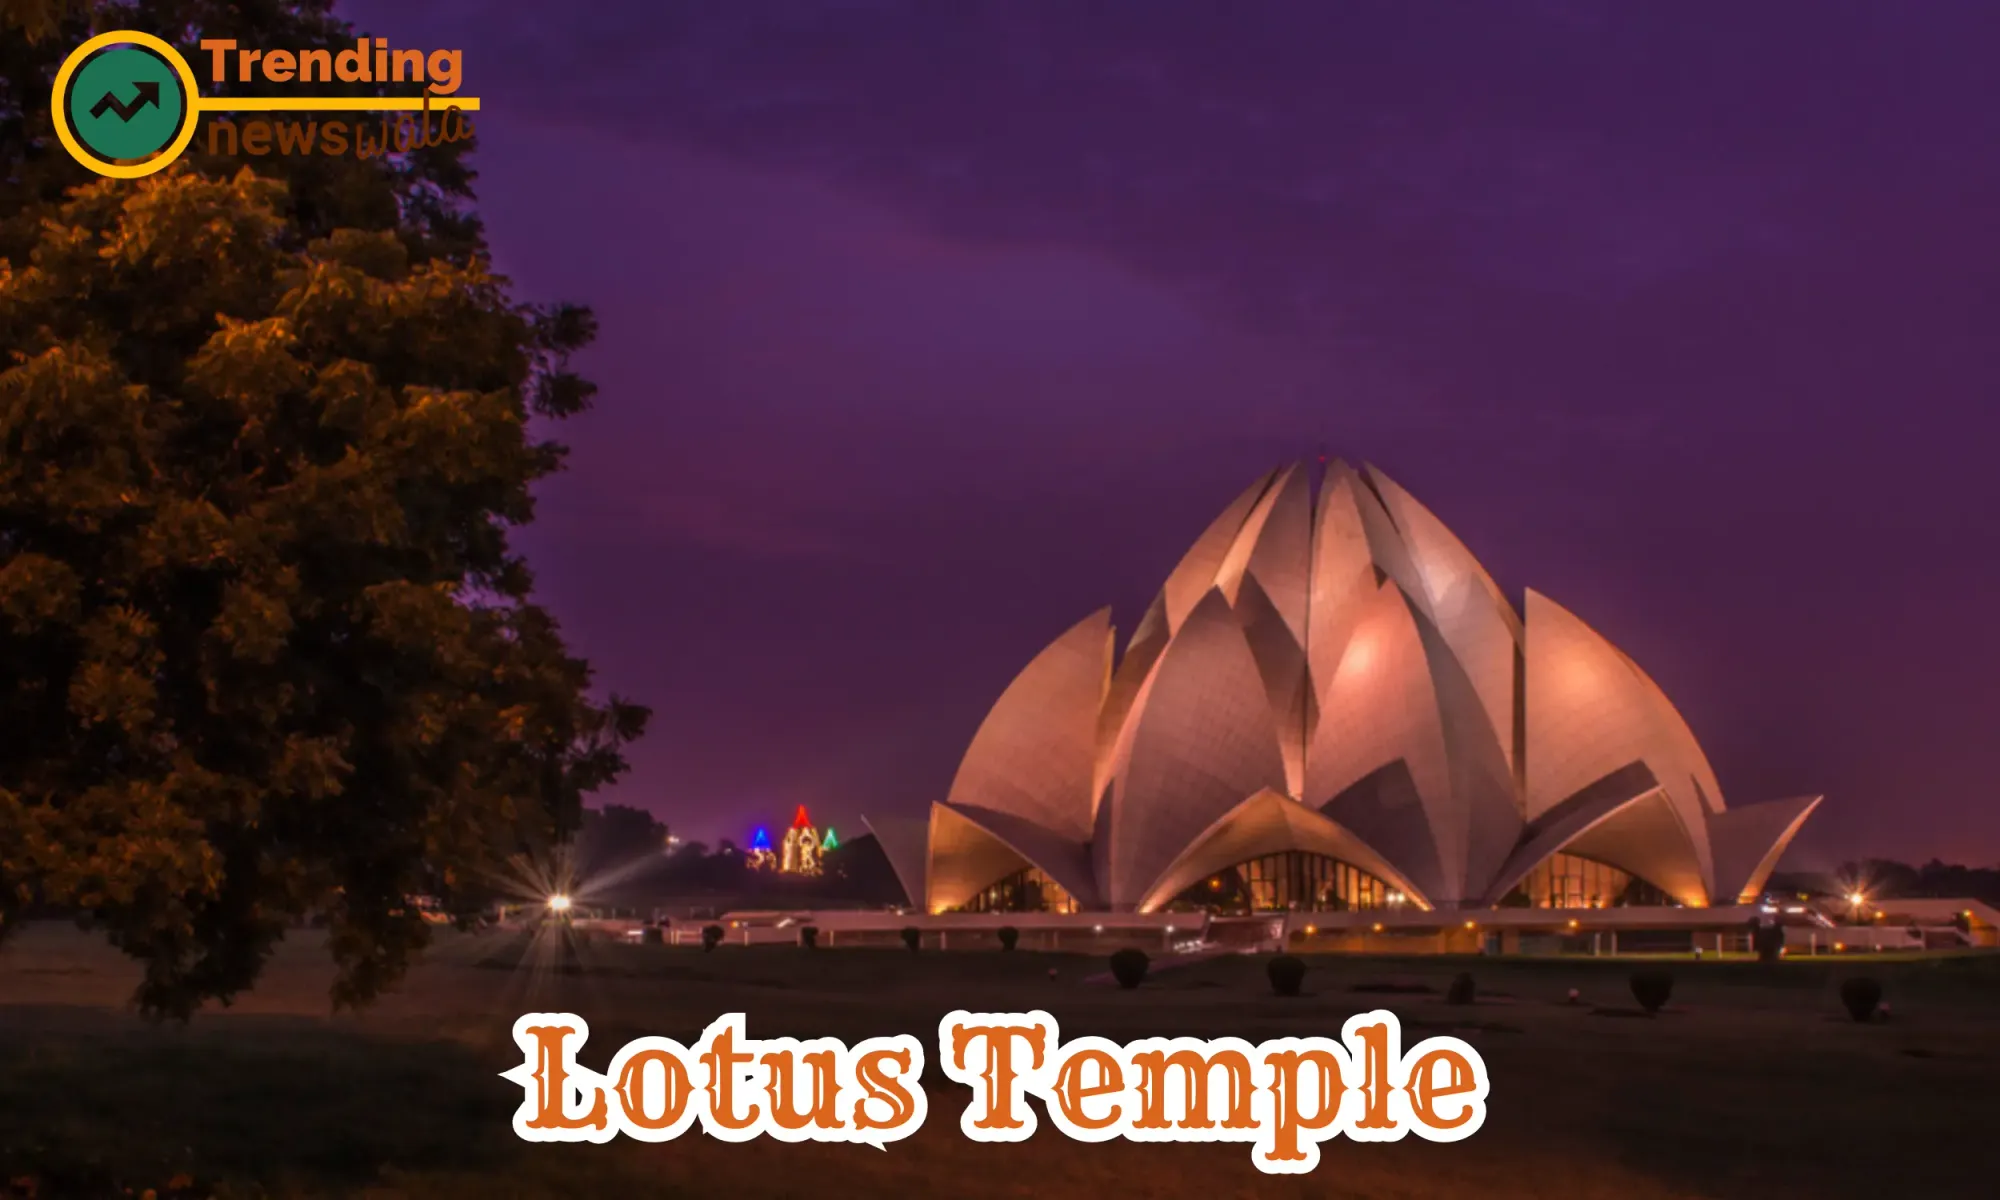 The Lotus Temple, also known as the Baháʼí House of Worship, 